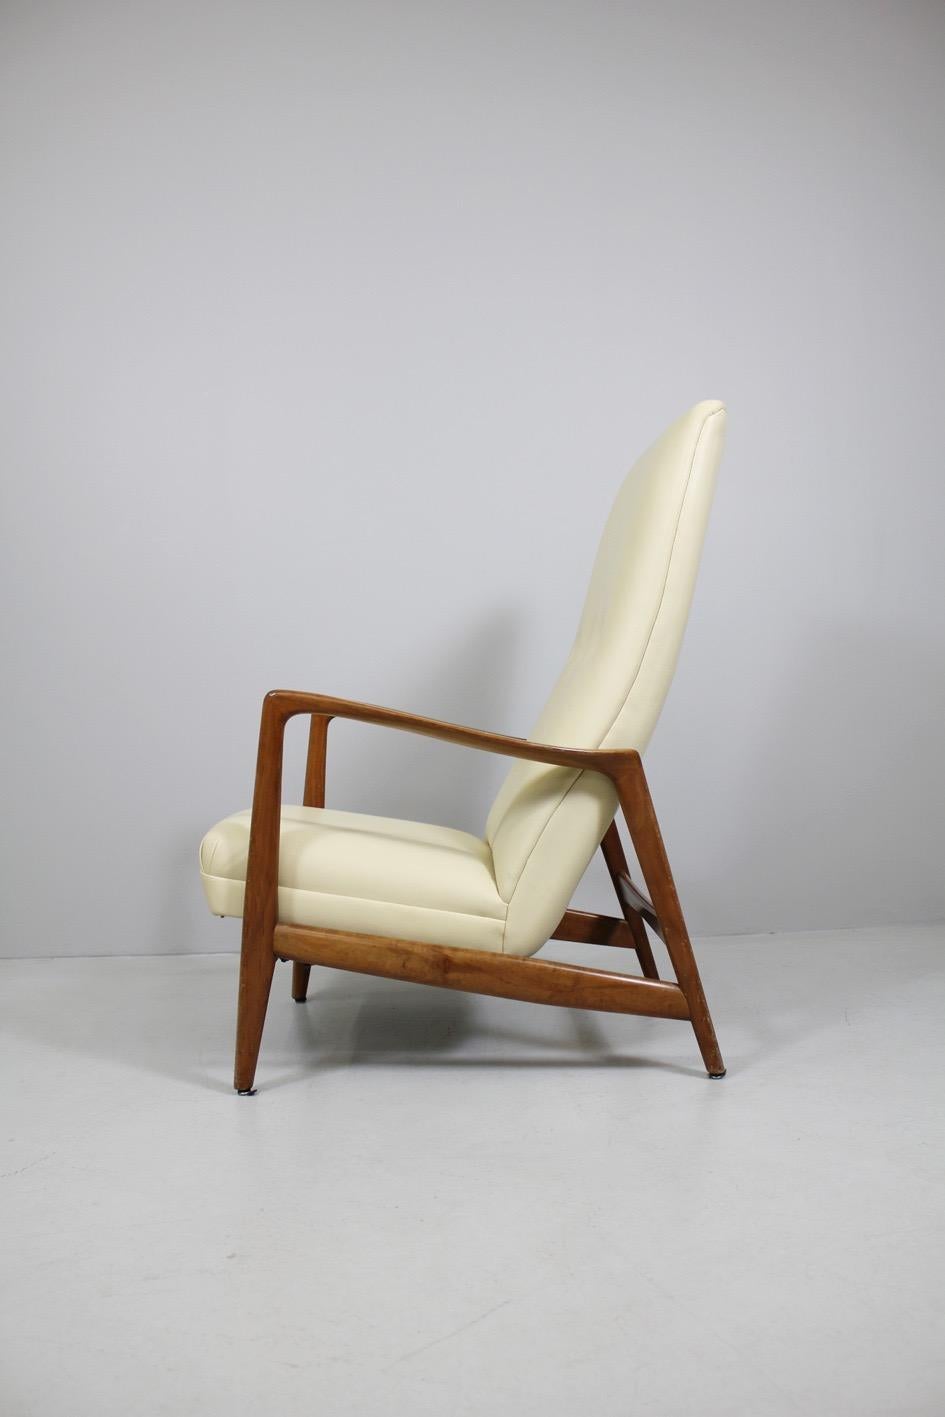 Armchair model 829 by Gio Ponti, Cassina Italy, 1960
designed for Hotel Parco di Principi
Di Sorrento 1960, architecture Gio Ponti

Adjustable seat which is able to be tilted
the upholstery is renewed.